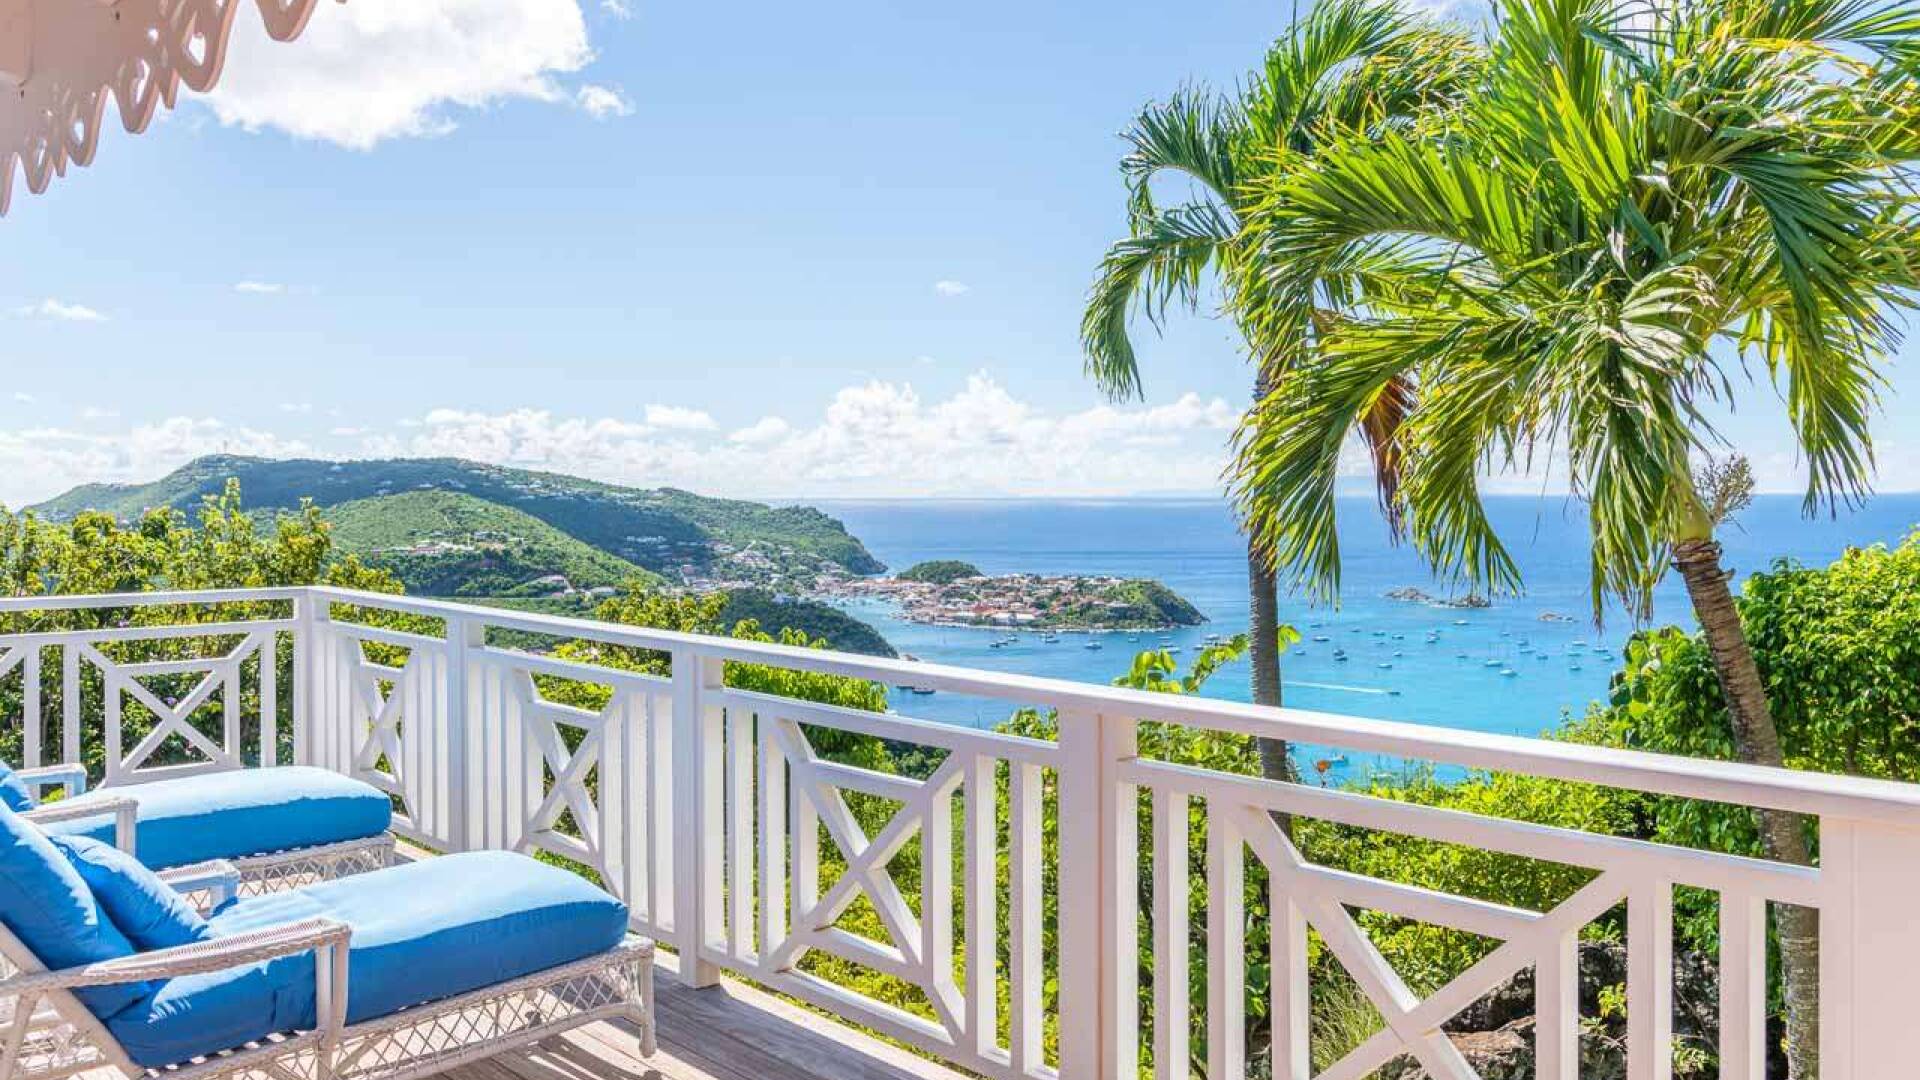 The view from WV MGO, Colombier, St. Barthelemy